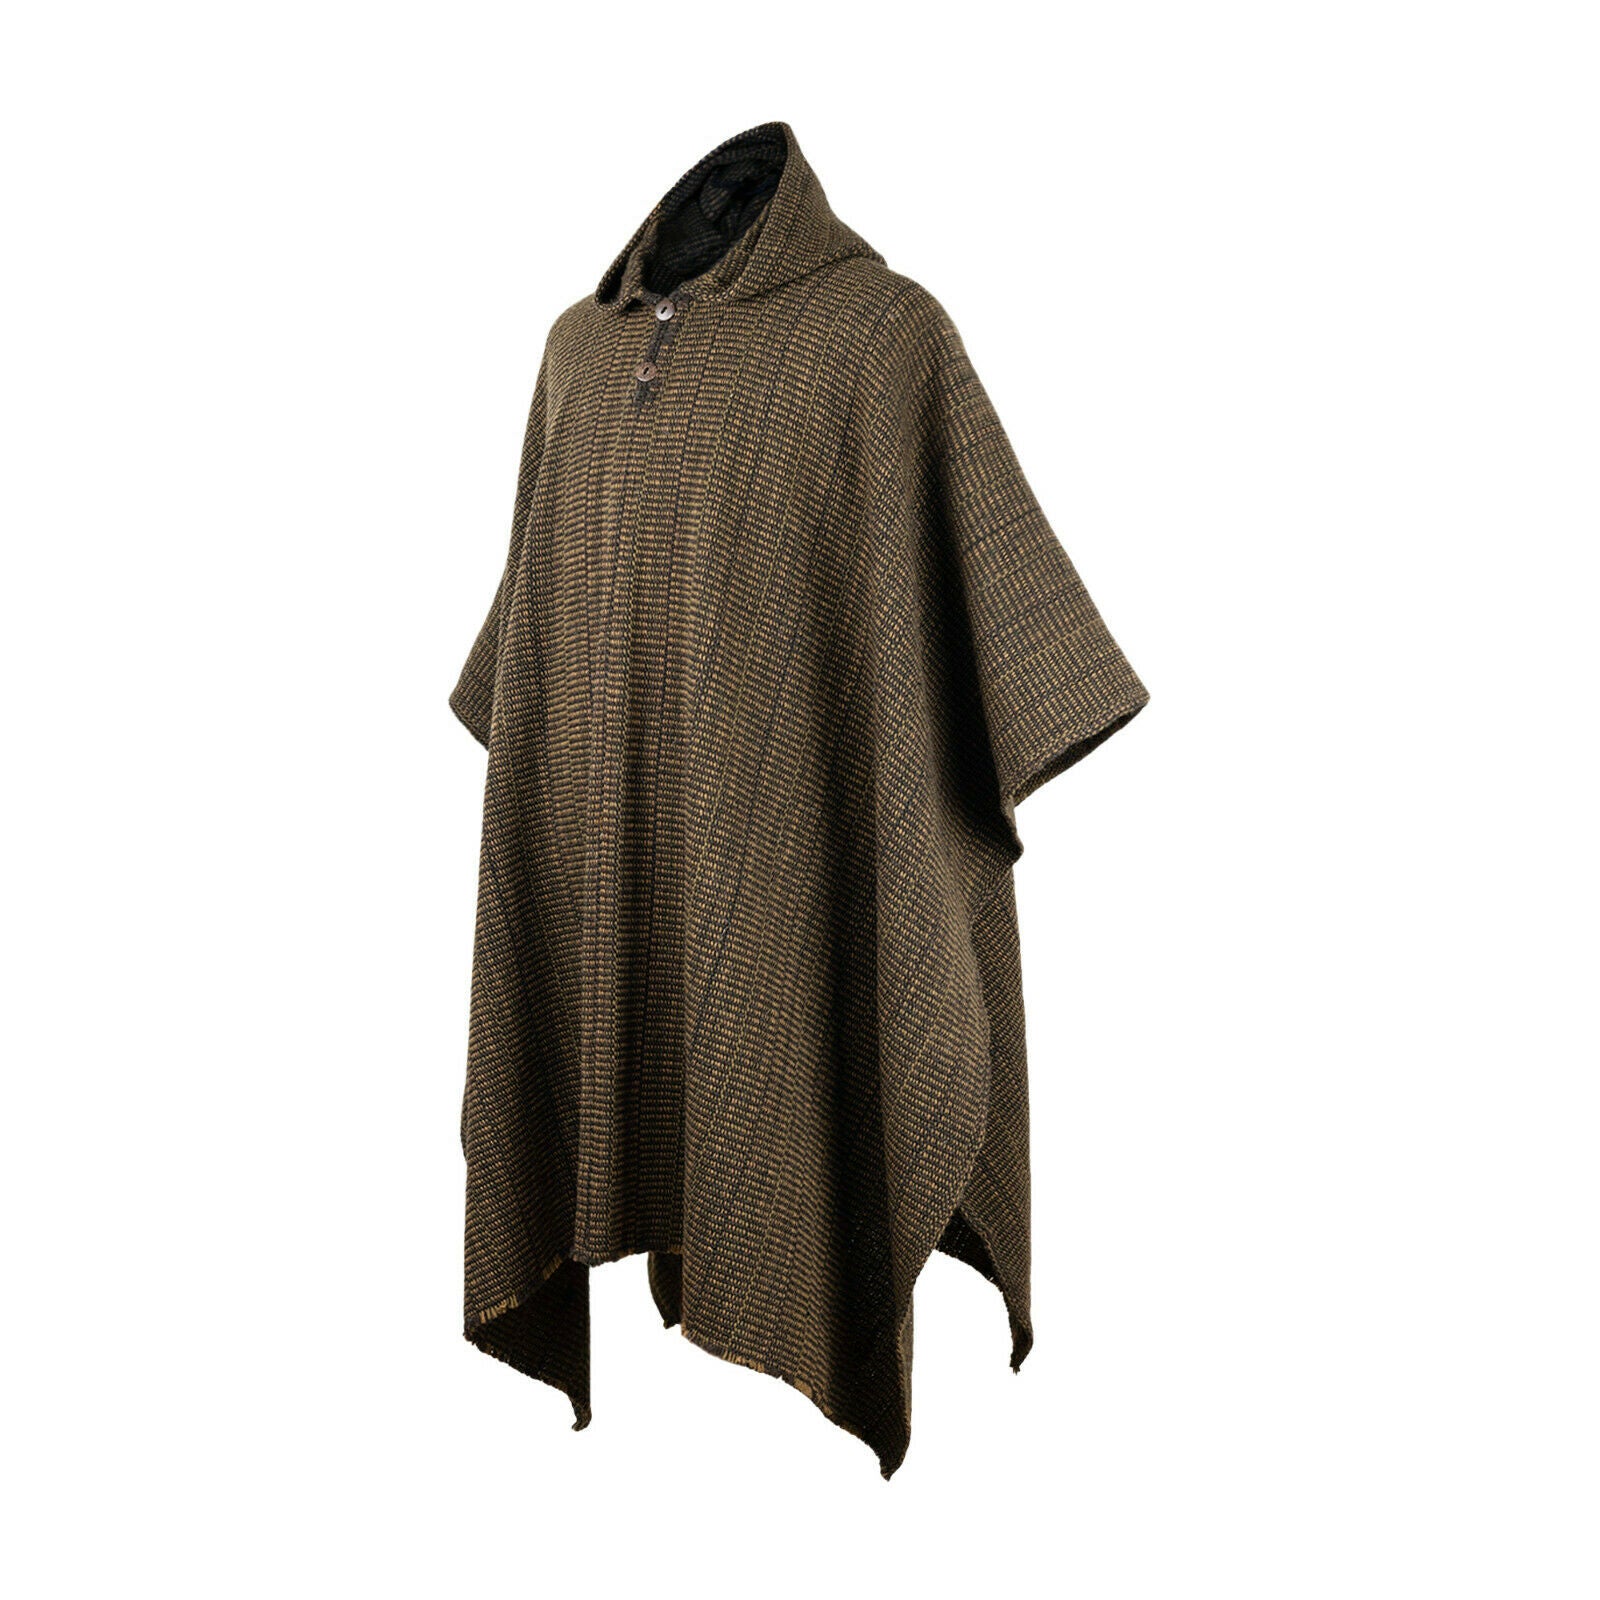 Zampu - Llama Wool Unisex South American Handwoven Thick Hooded Poncho - solid brown - coffee beans pattern